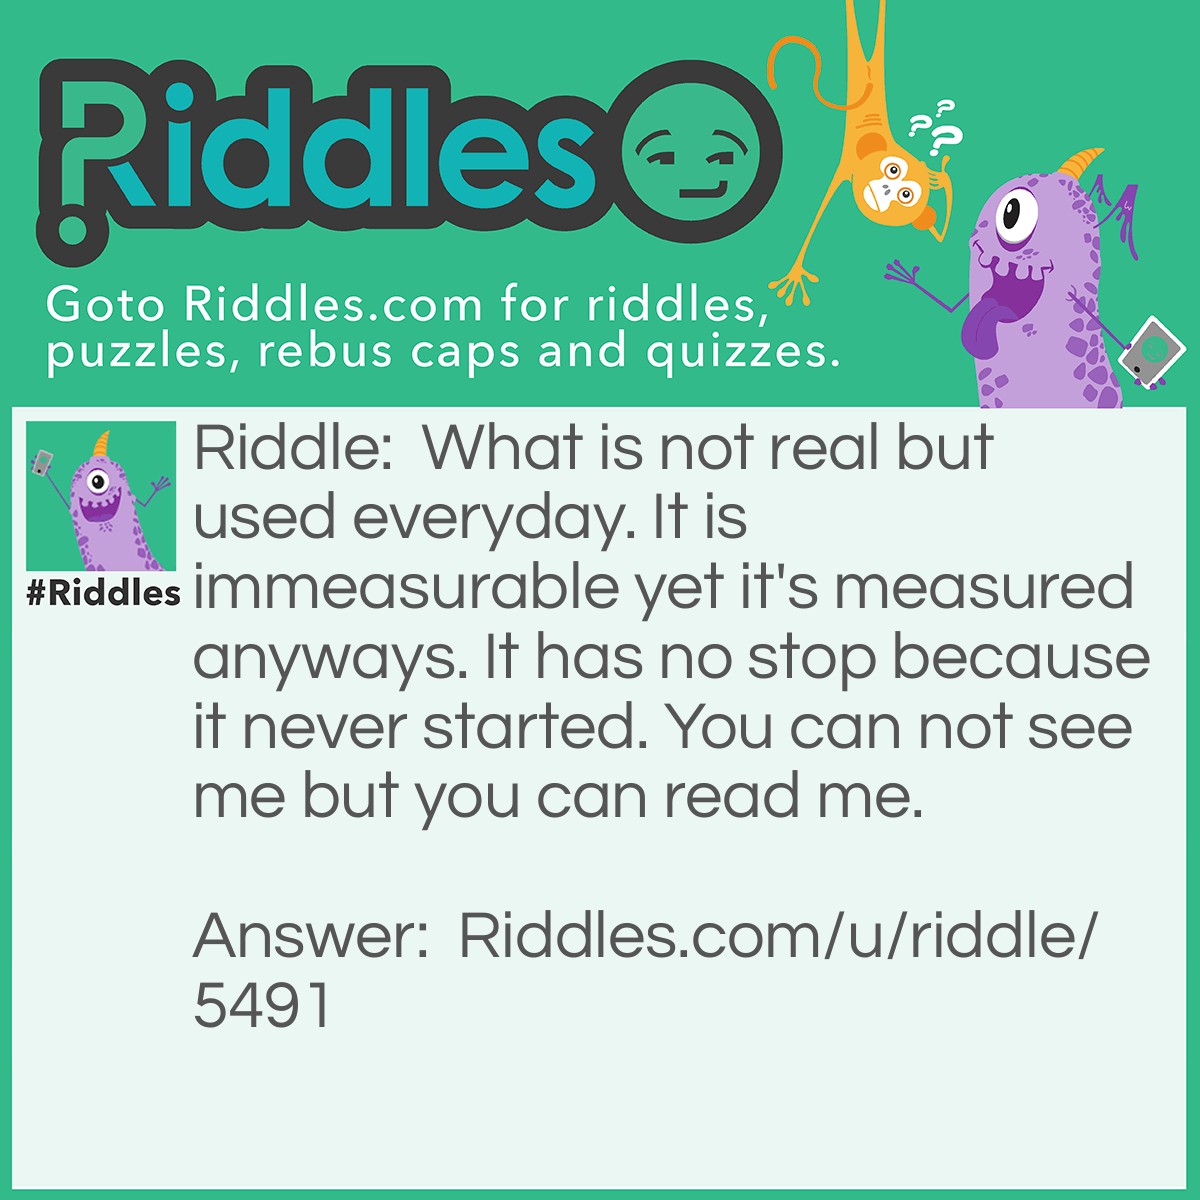 Riddle: What is not real but used everyday. It is immeasurable yet it's measured anyways. It has no stop because it never started. You can not see me but you can read me. Answer: Time.